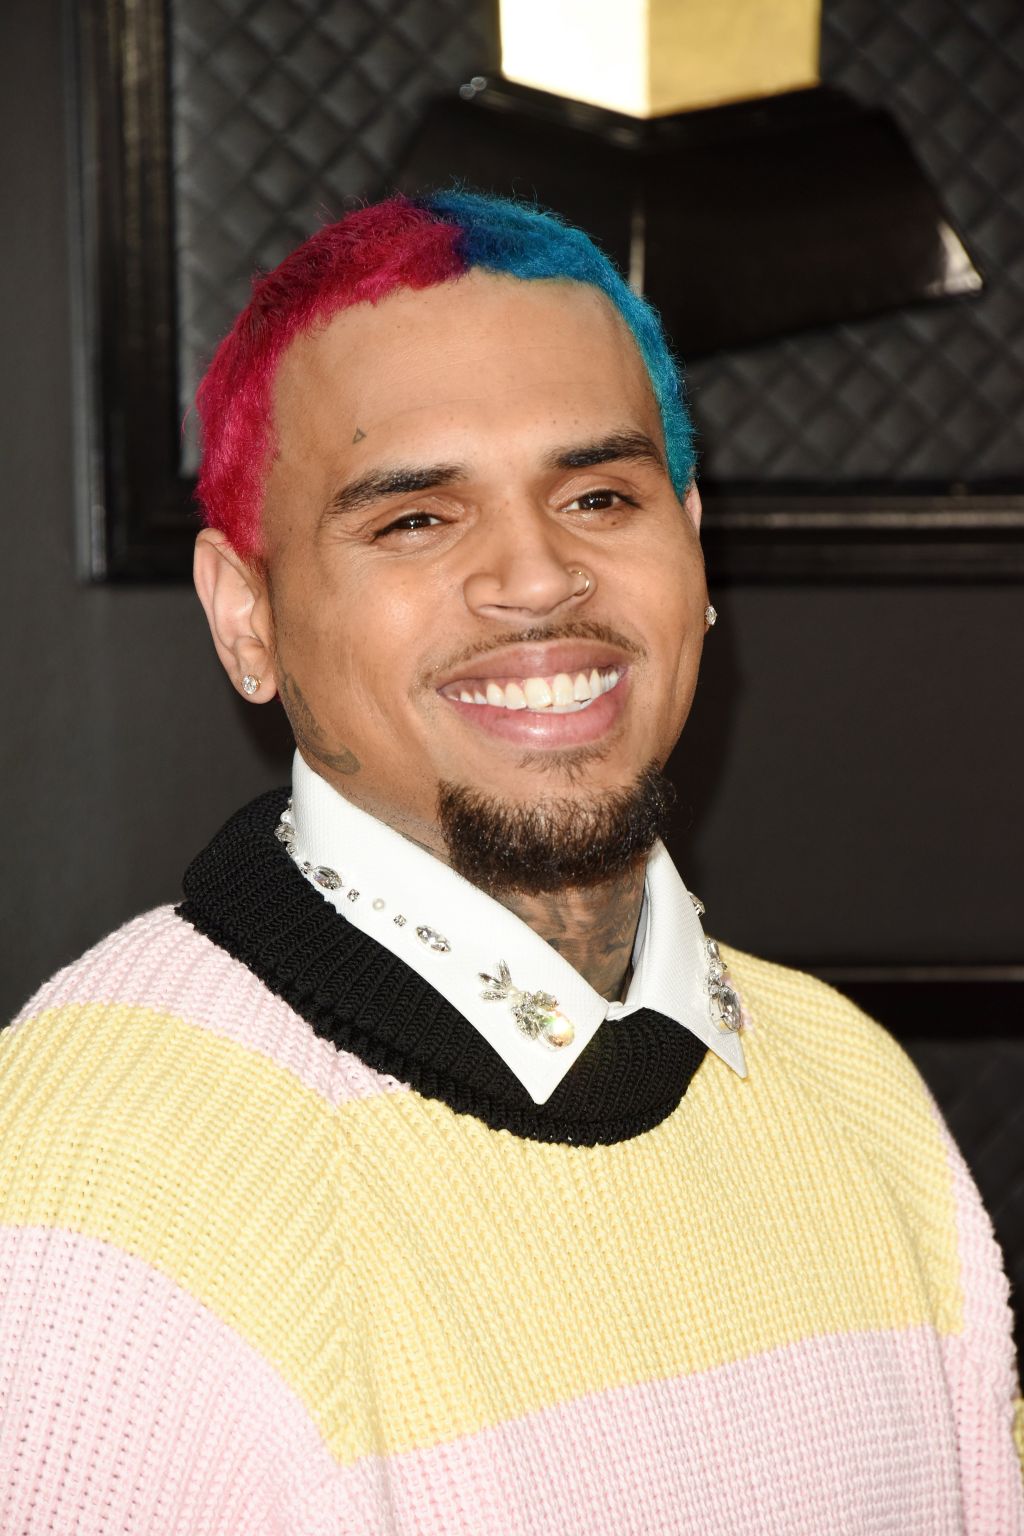 Chris Brown arrives at the 62nd Annual GRAMMY Awards at Staples Center on January 26, 2020 in Los Angeles, California